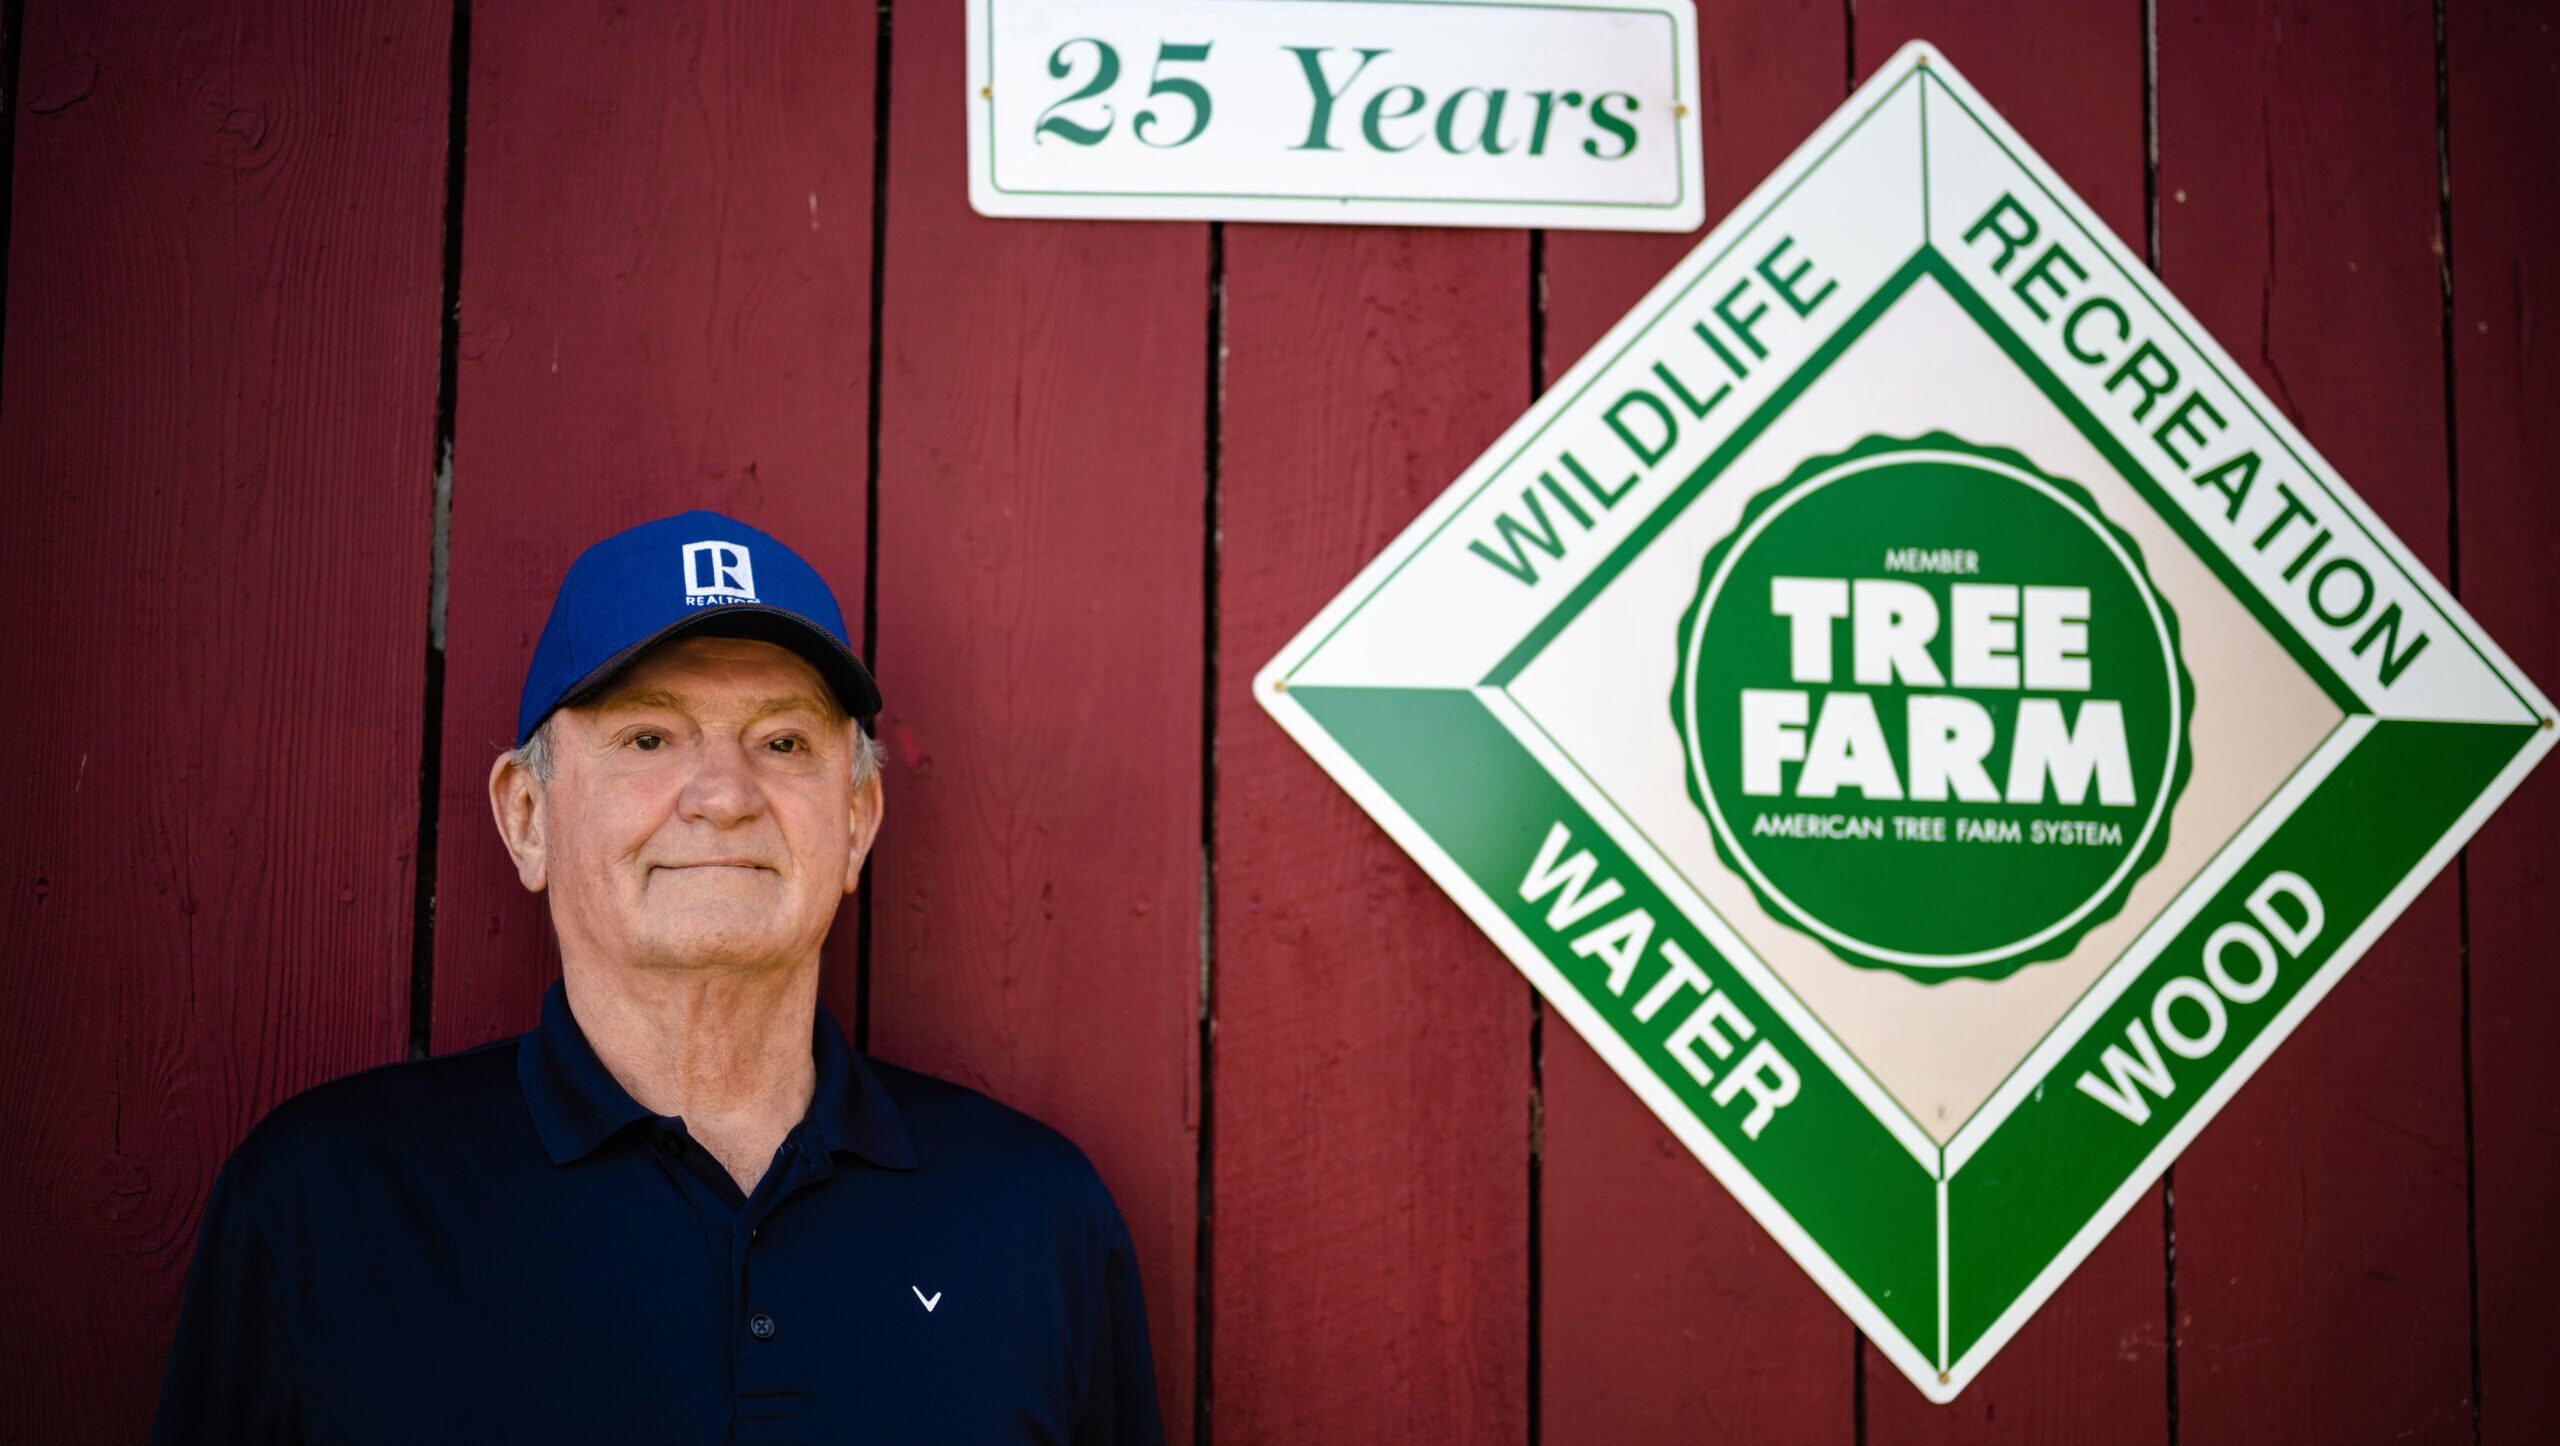 Dave Jamieson, Realtor from William Raveis' Barre Vermont office is also a tree farmer and land specialist.